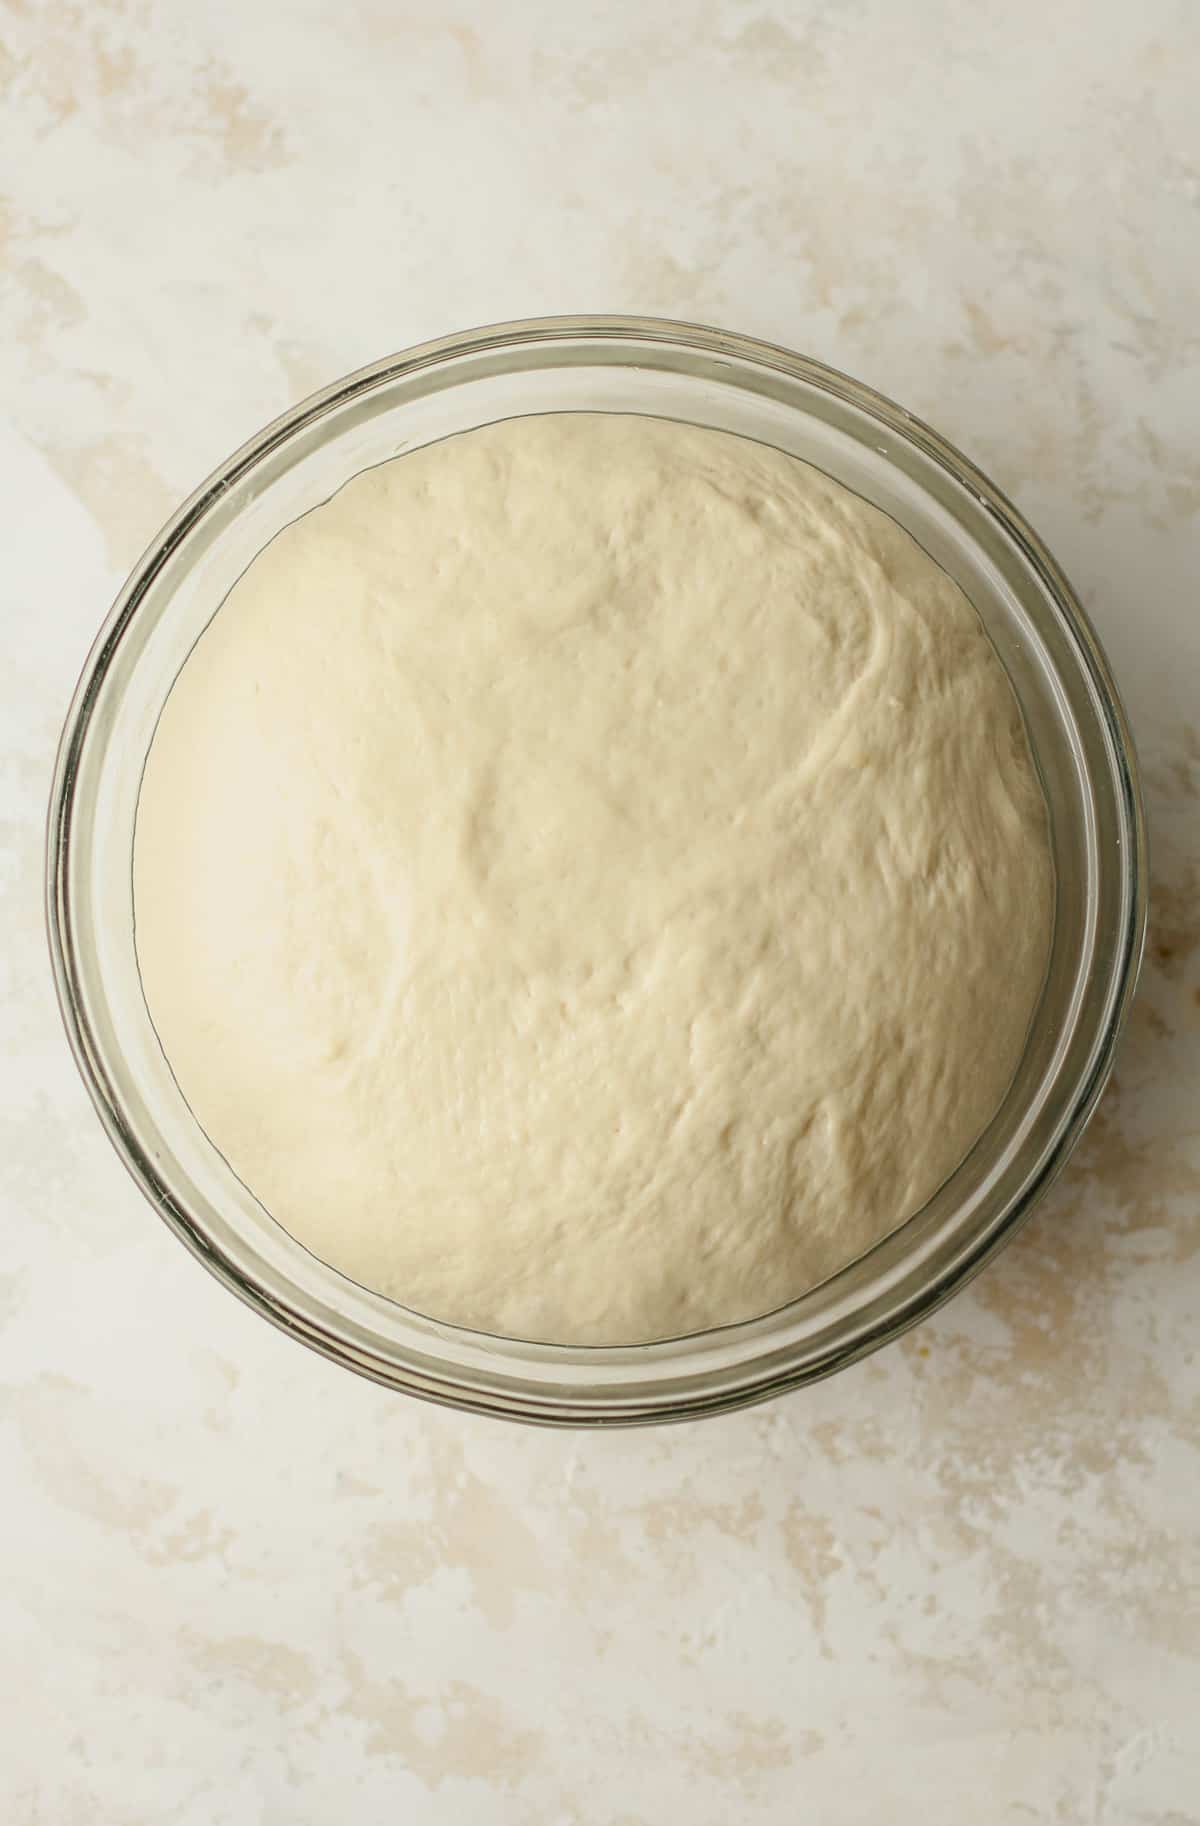 A bowl of the naan bread dough after rising.